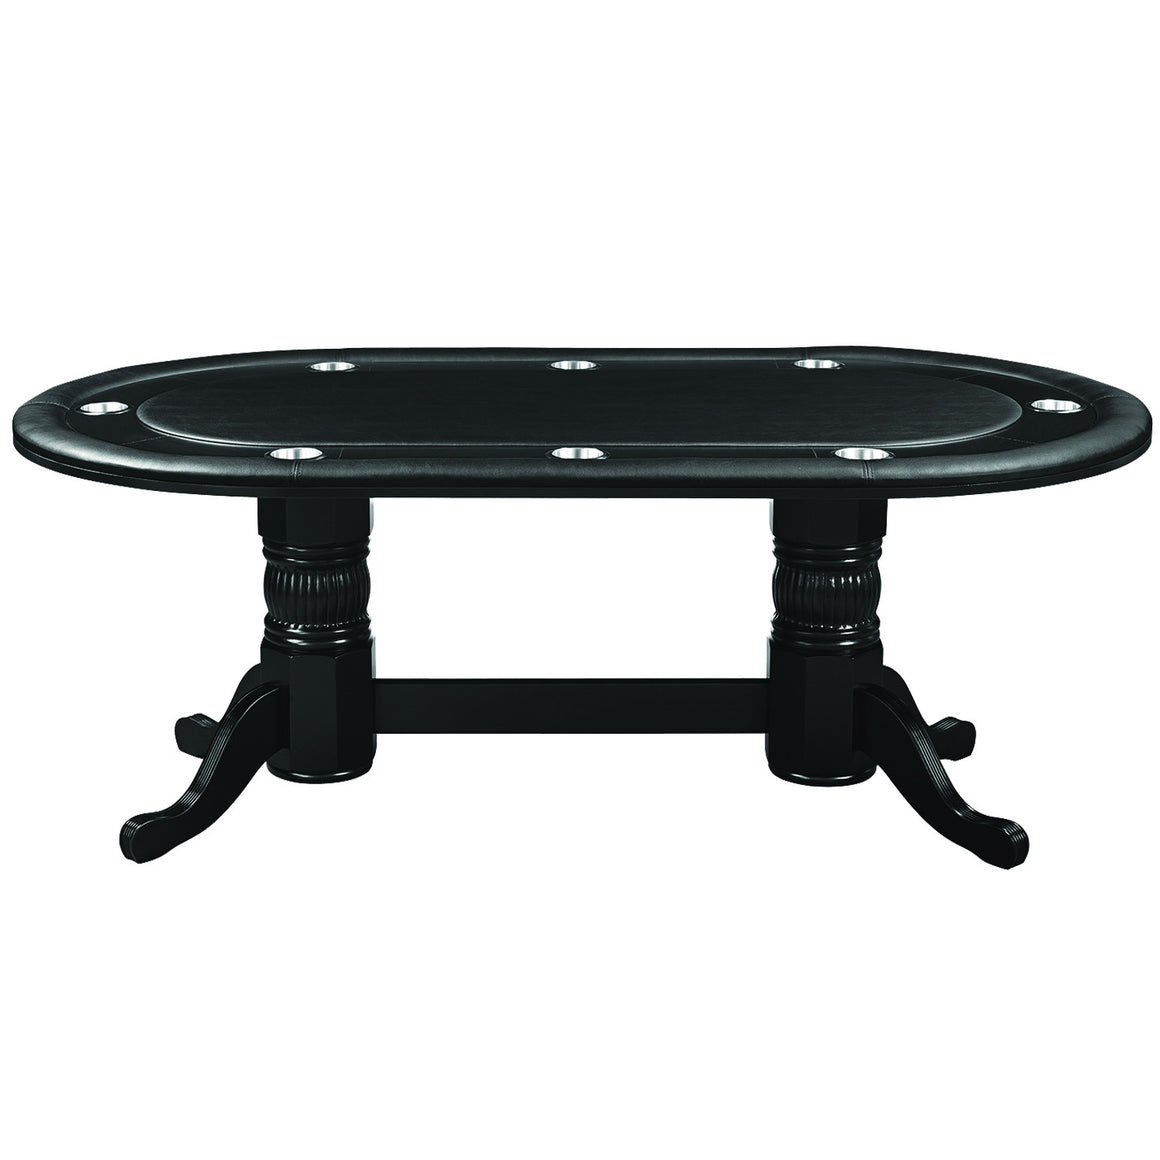 84" Texas Hold'em Poker and Game Table Dining Top - Black Finish - Man Cave Boutique